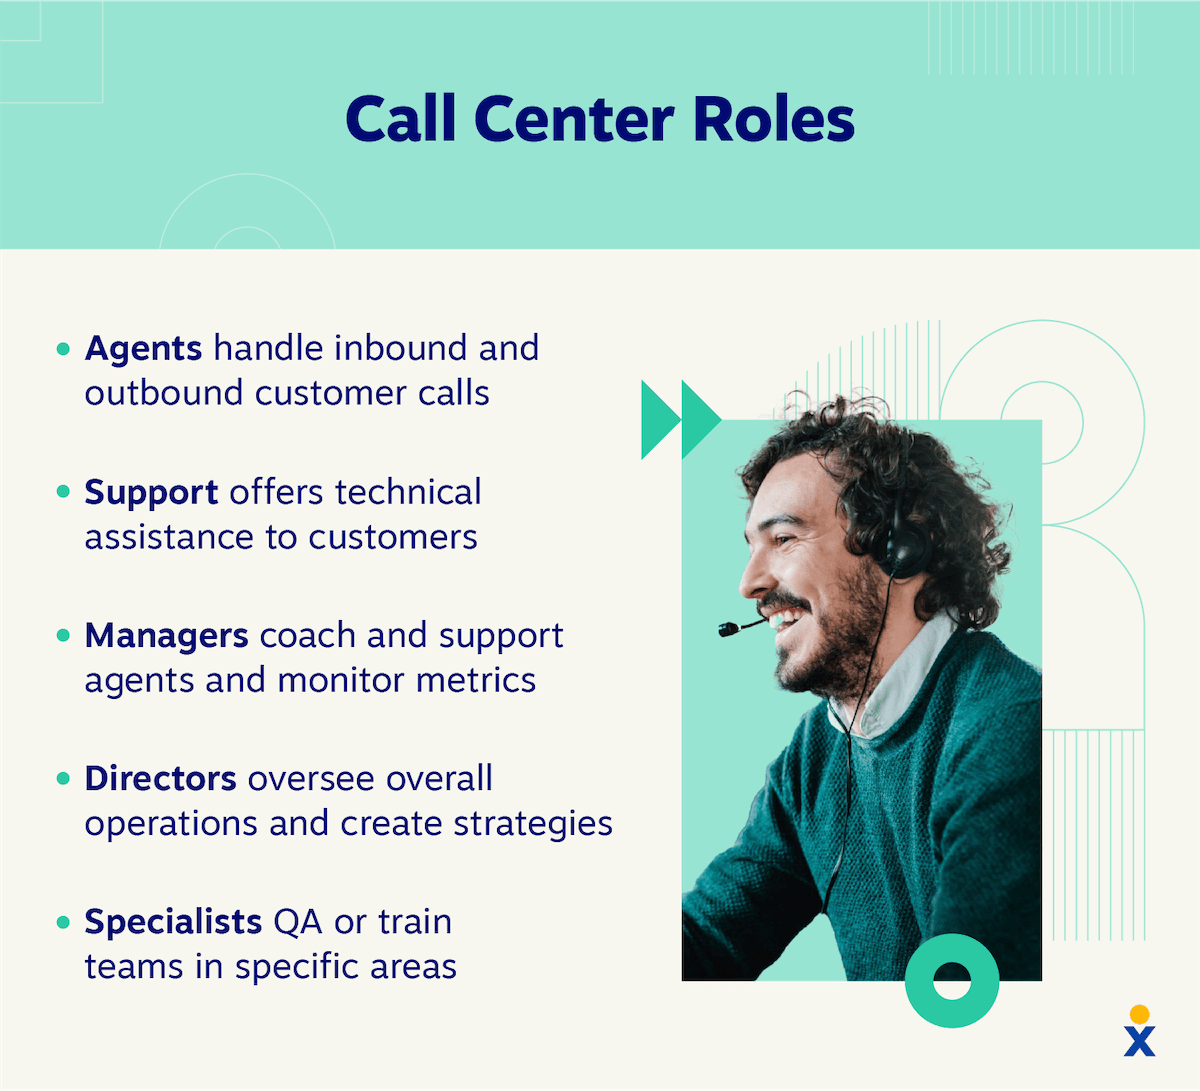 Five call center roles, including agents, support, managers, directors, and specialists.